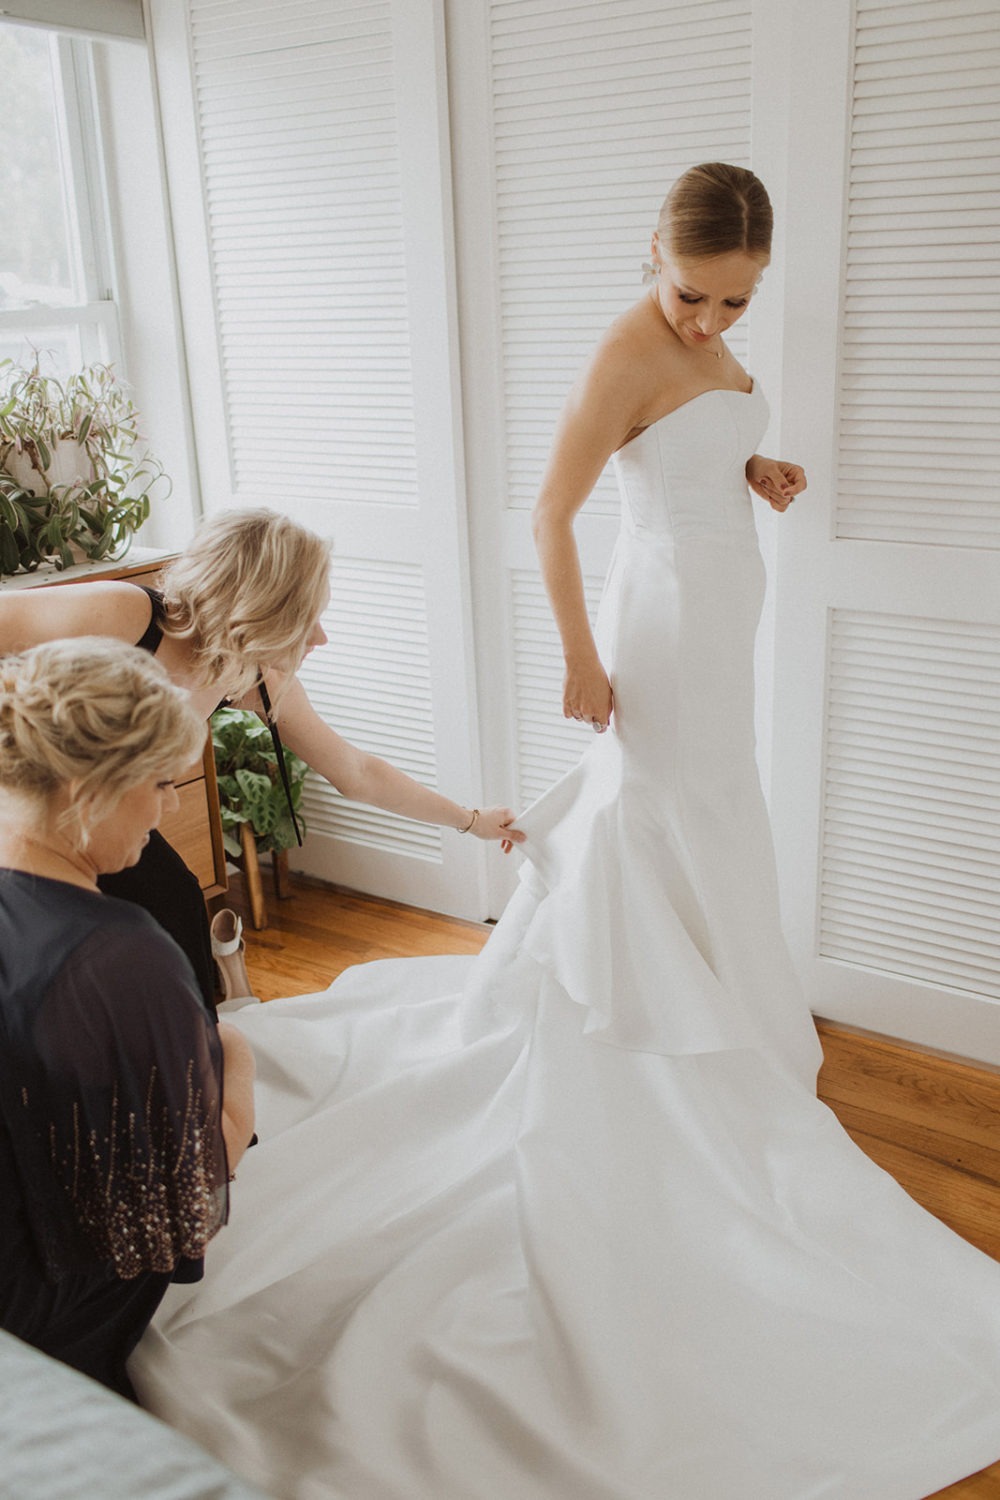 Bride puts on wedding dress for her intimate wedding